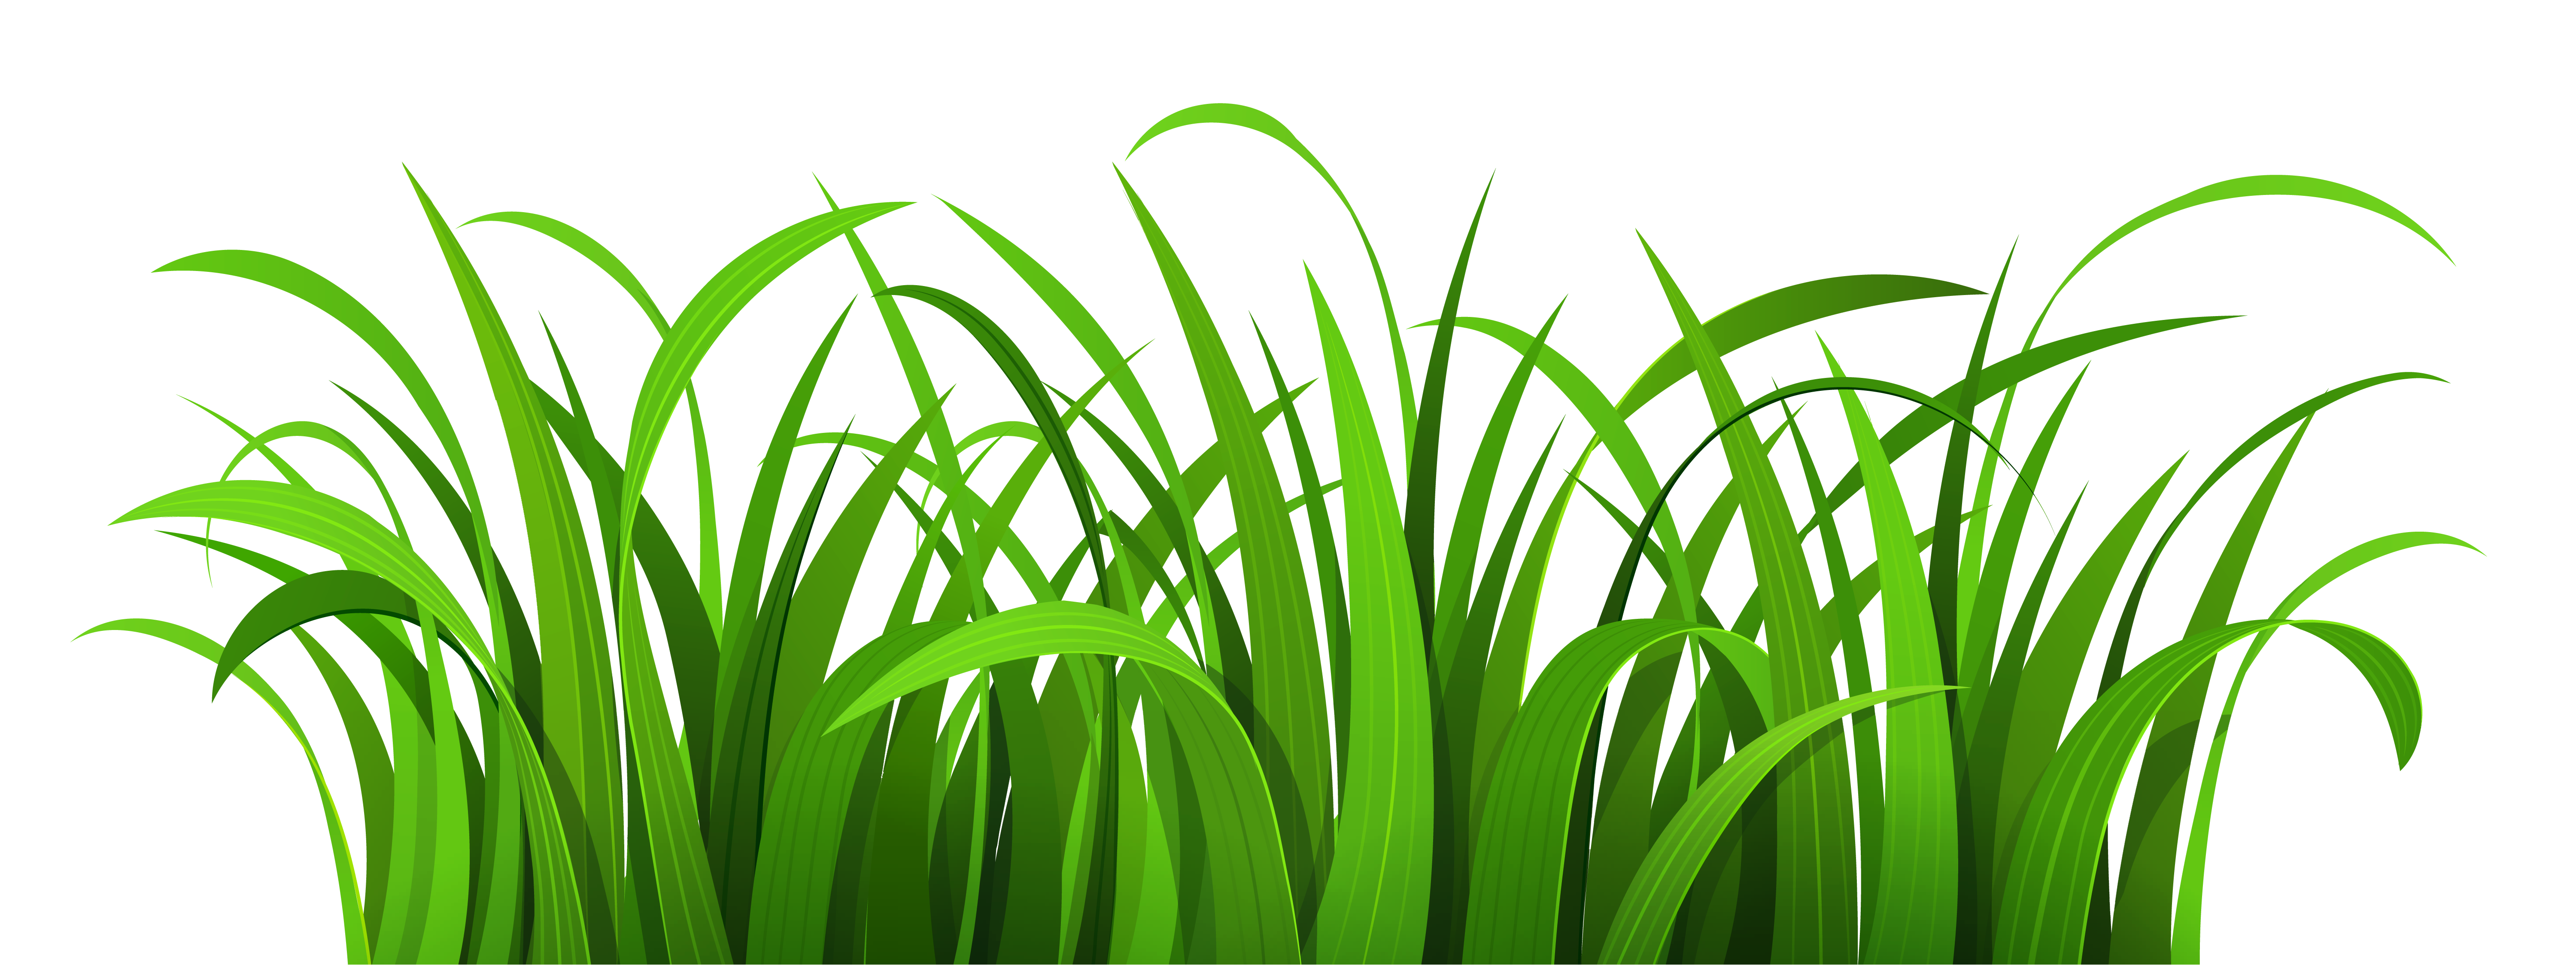 Grass And Flowers Clip Art | Clipart Panda - Free Clipart Images